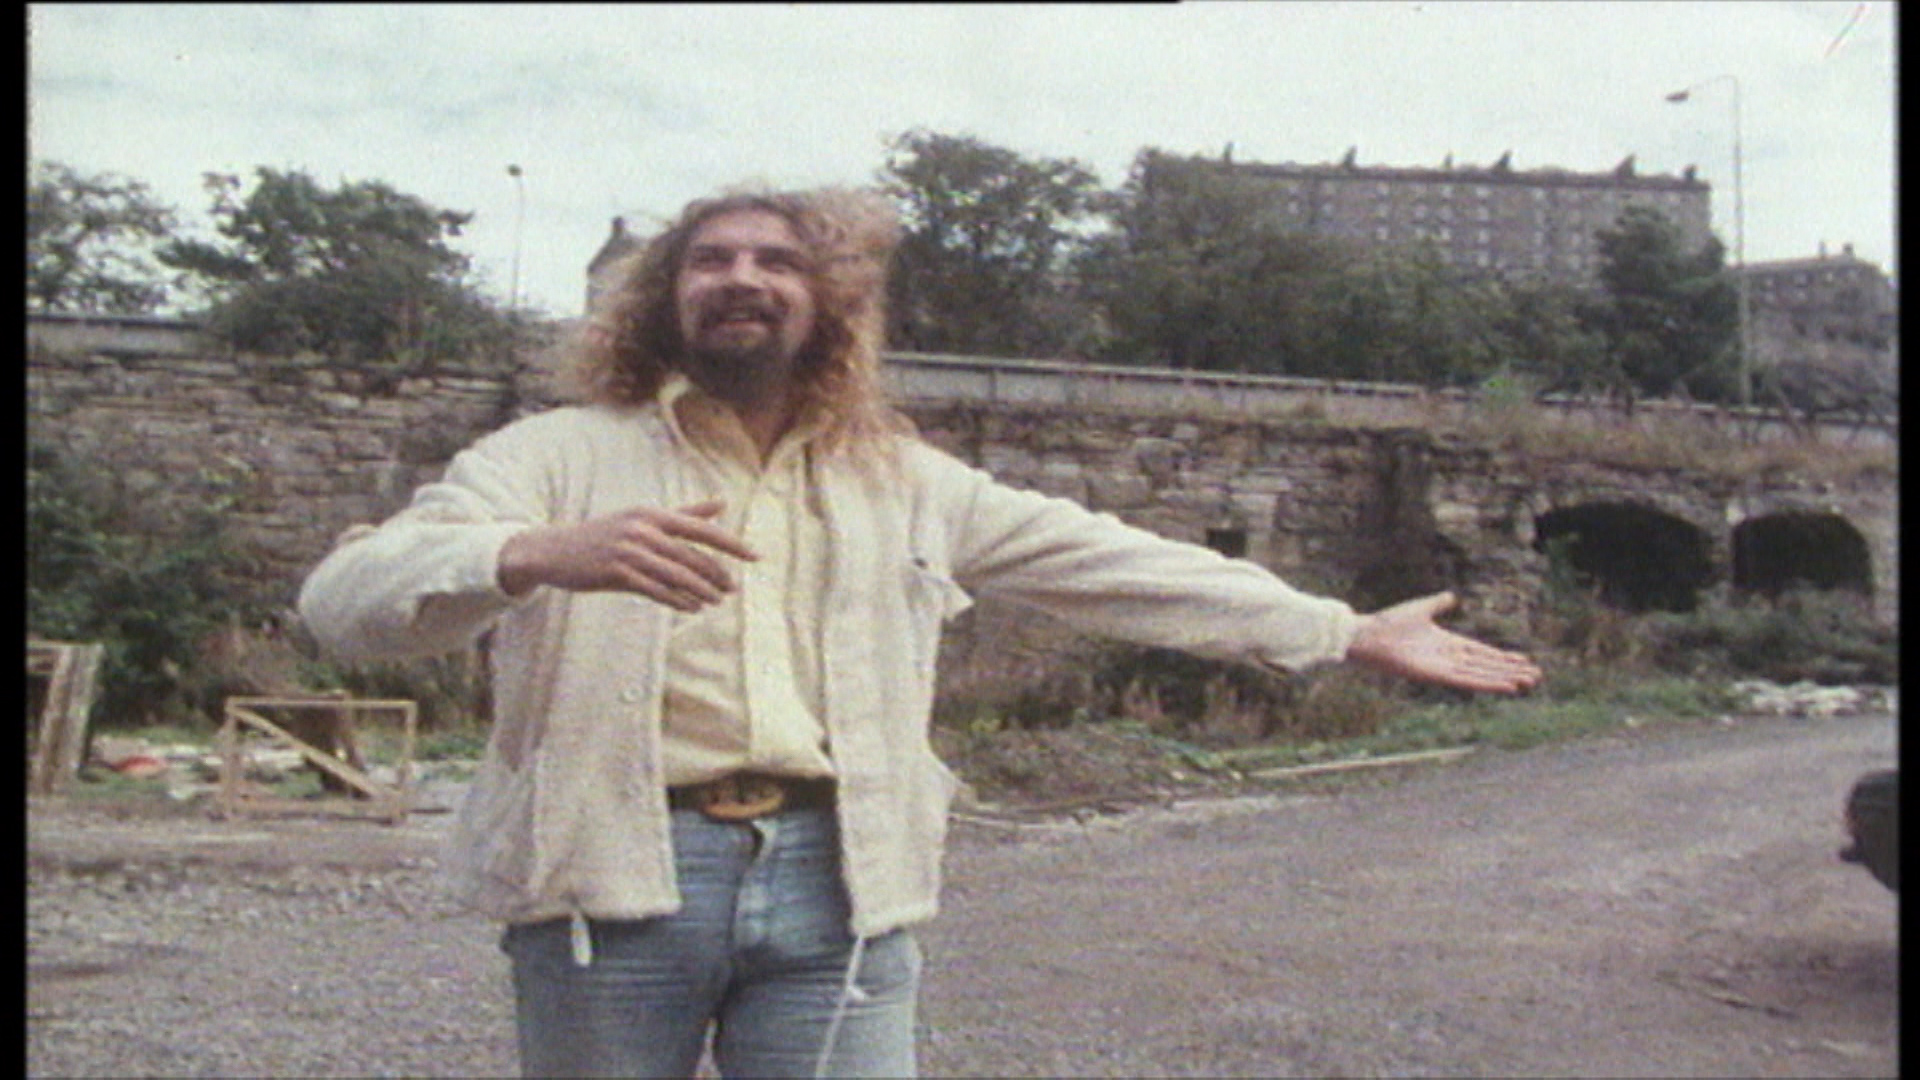 Billy Connolly has been entertaining audiences for 50 years.